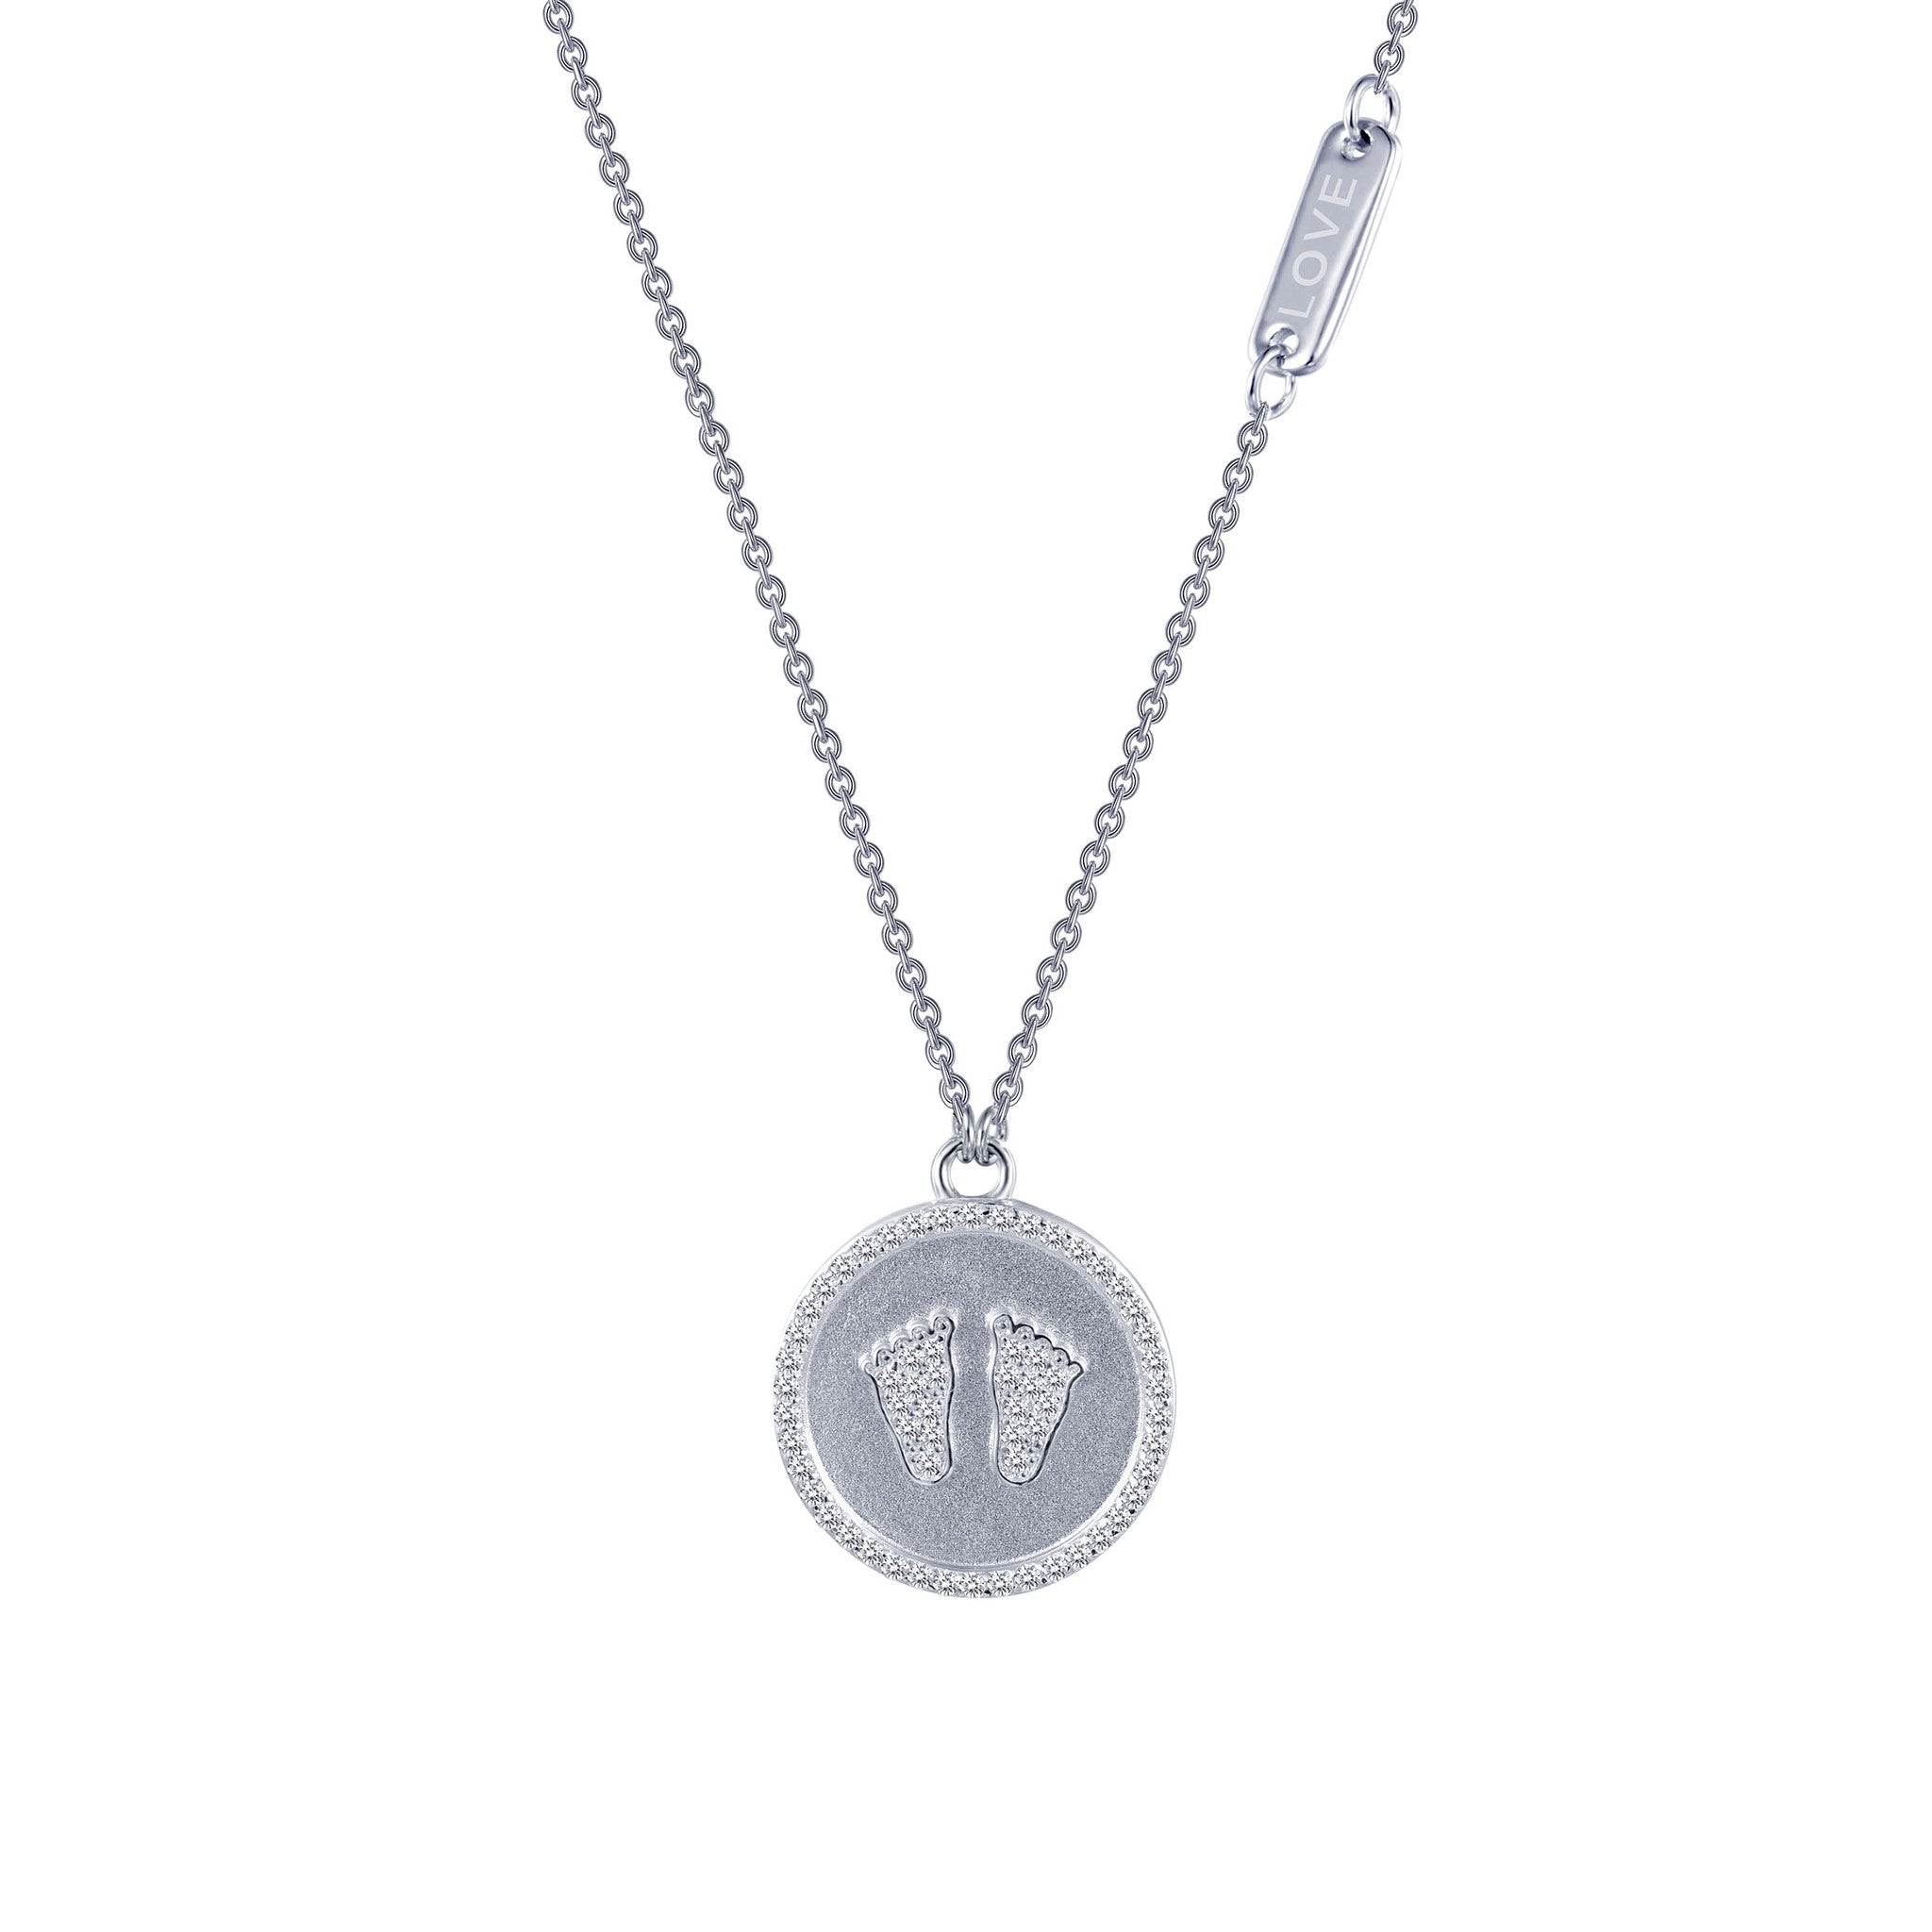 Baby Feet Sterling Silver and Platinum Necklace by Lafonn